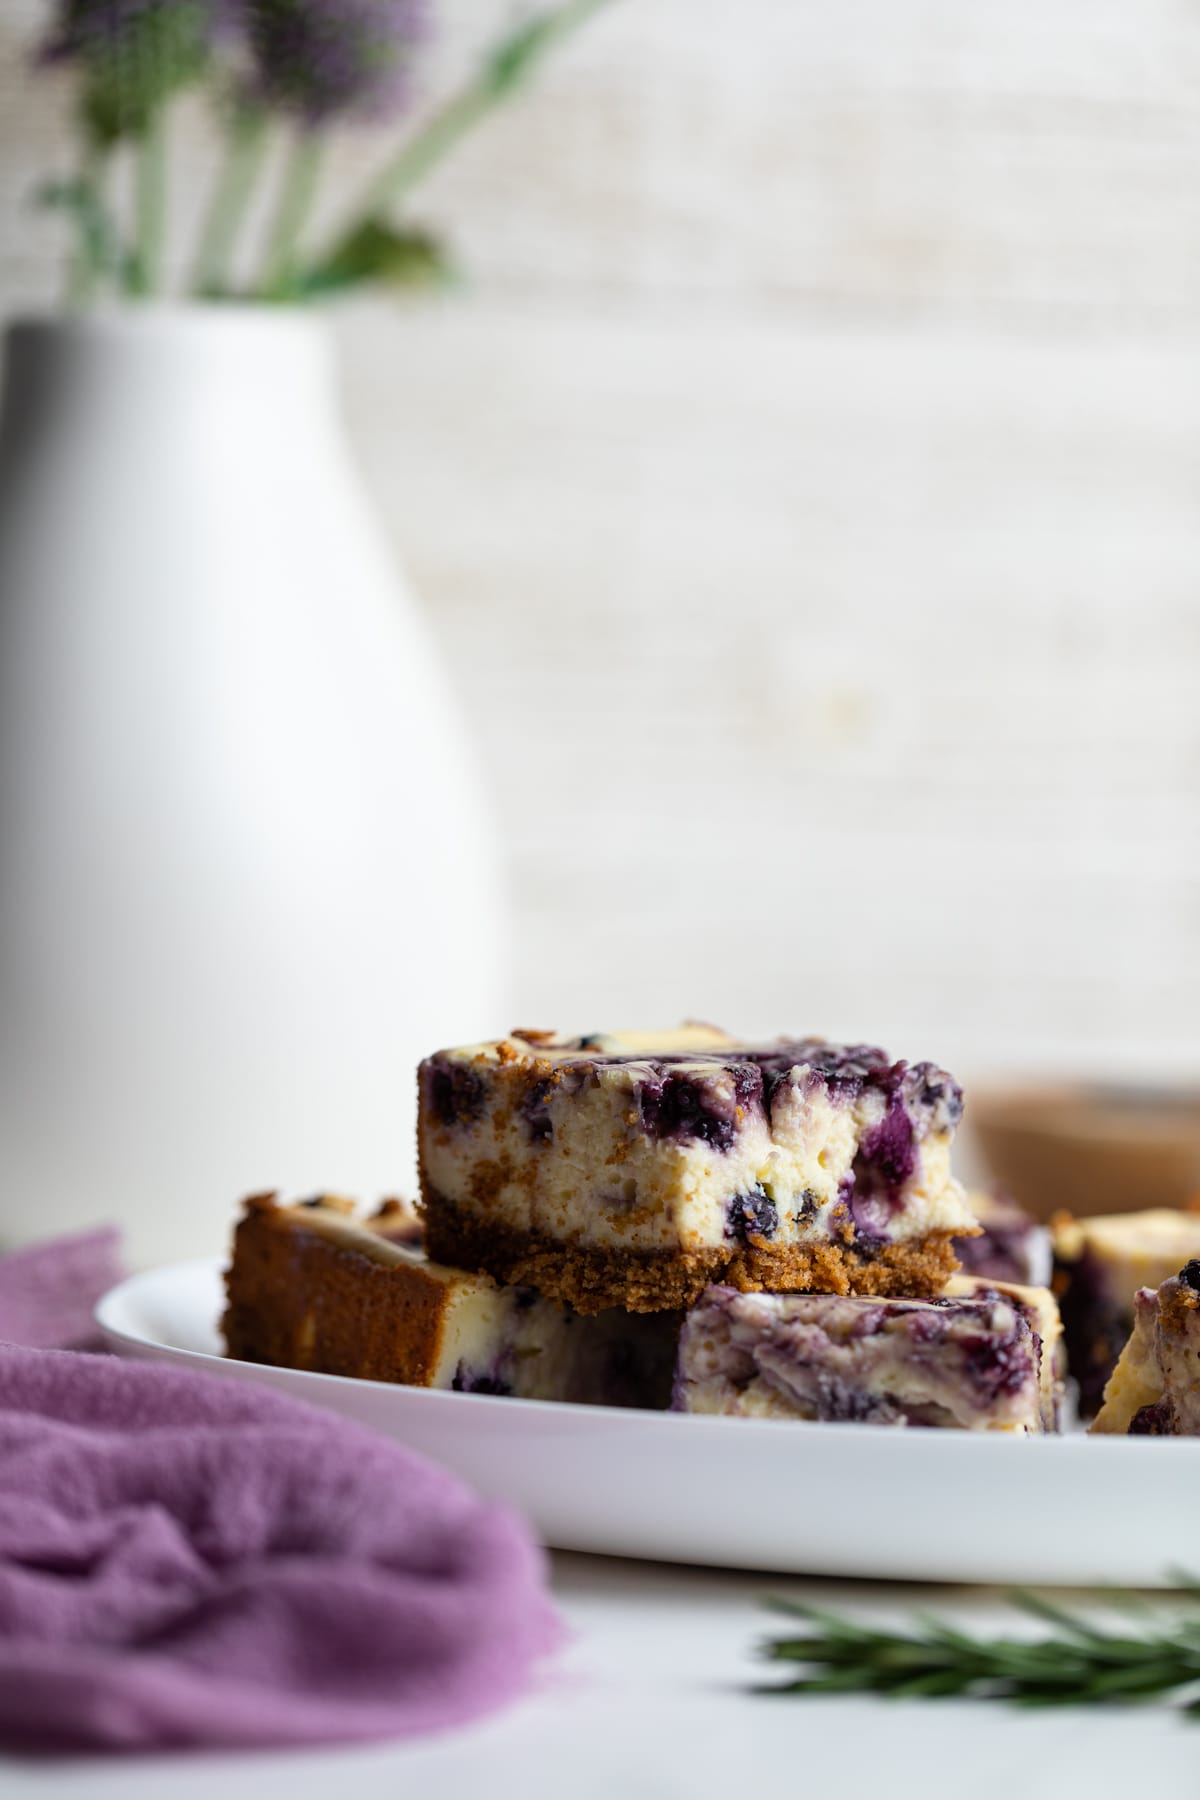 Lemon Blueberry Cheesecake Bars on a white plate with flowers in the background